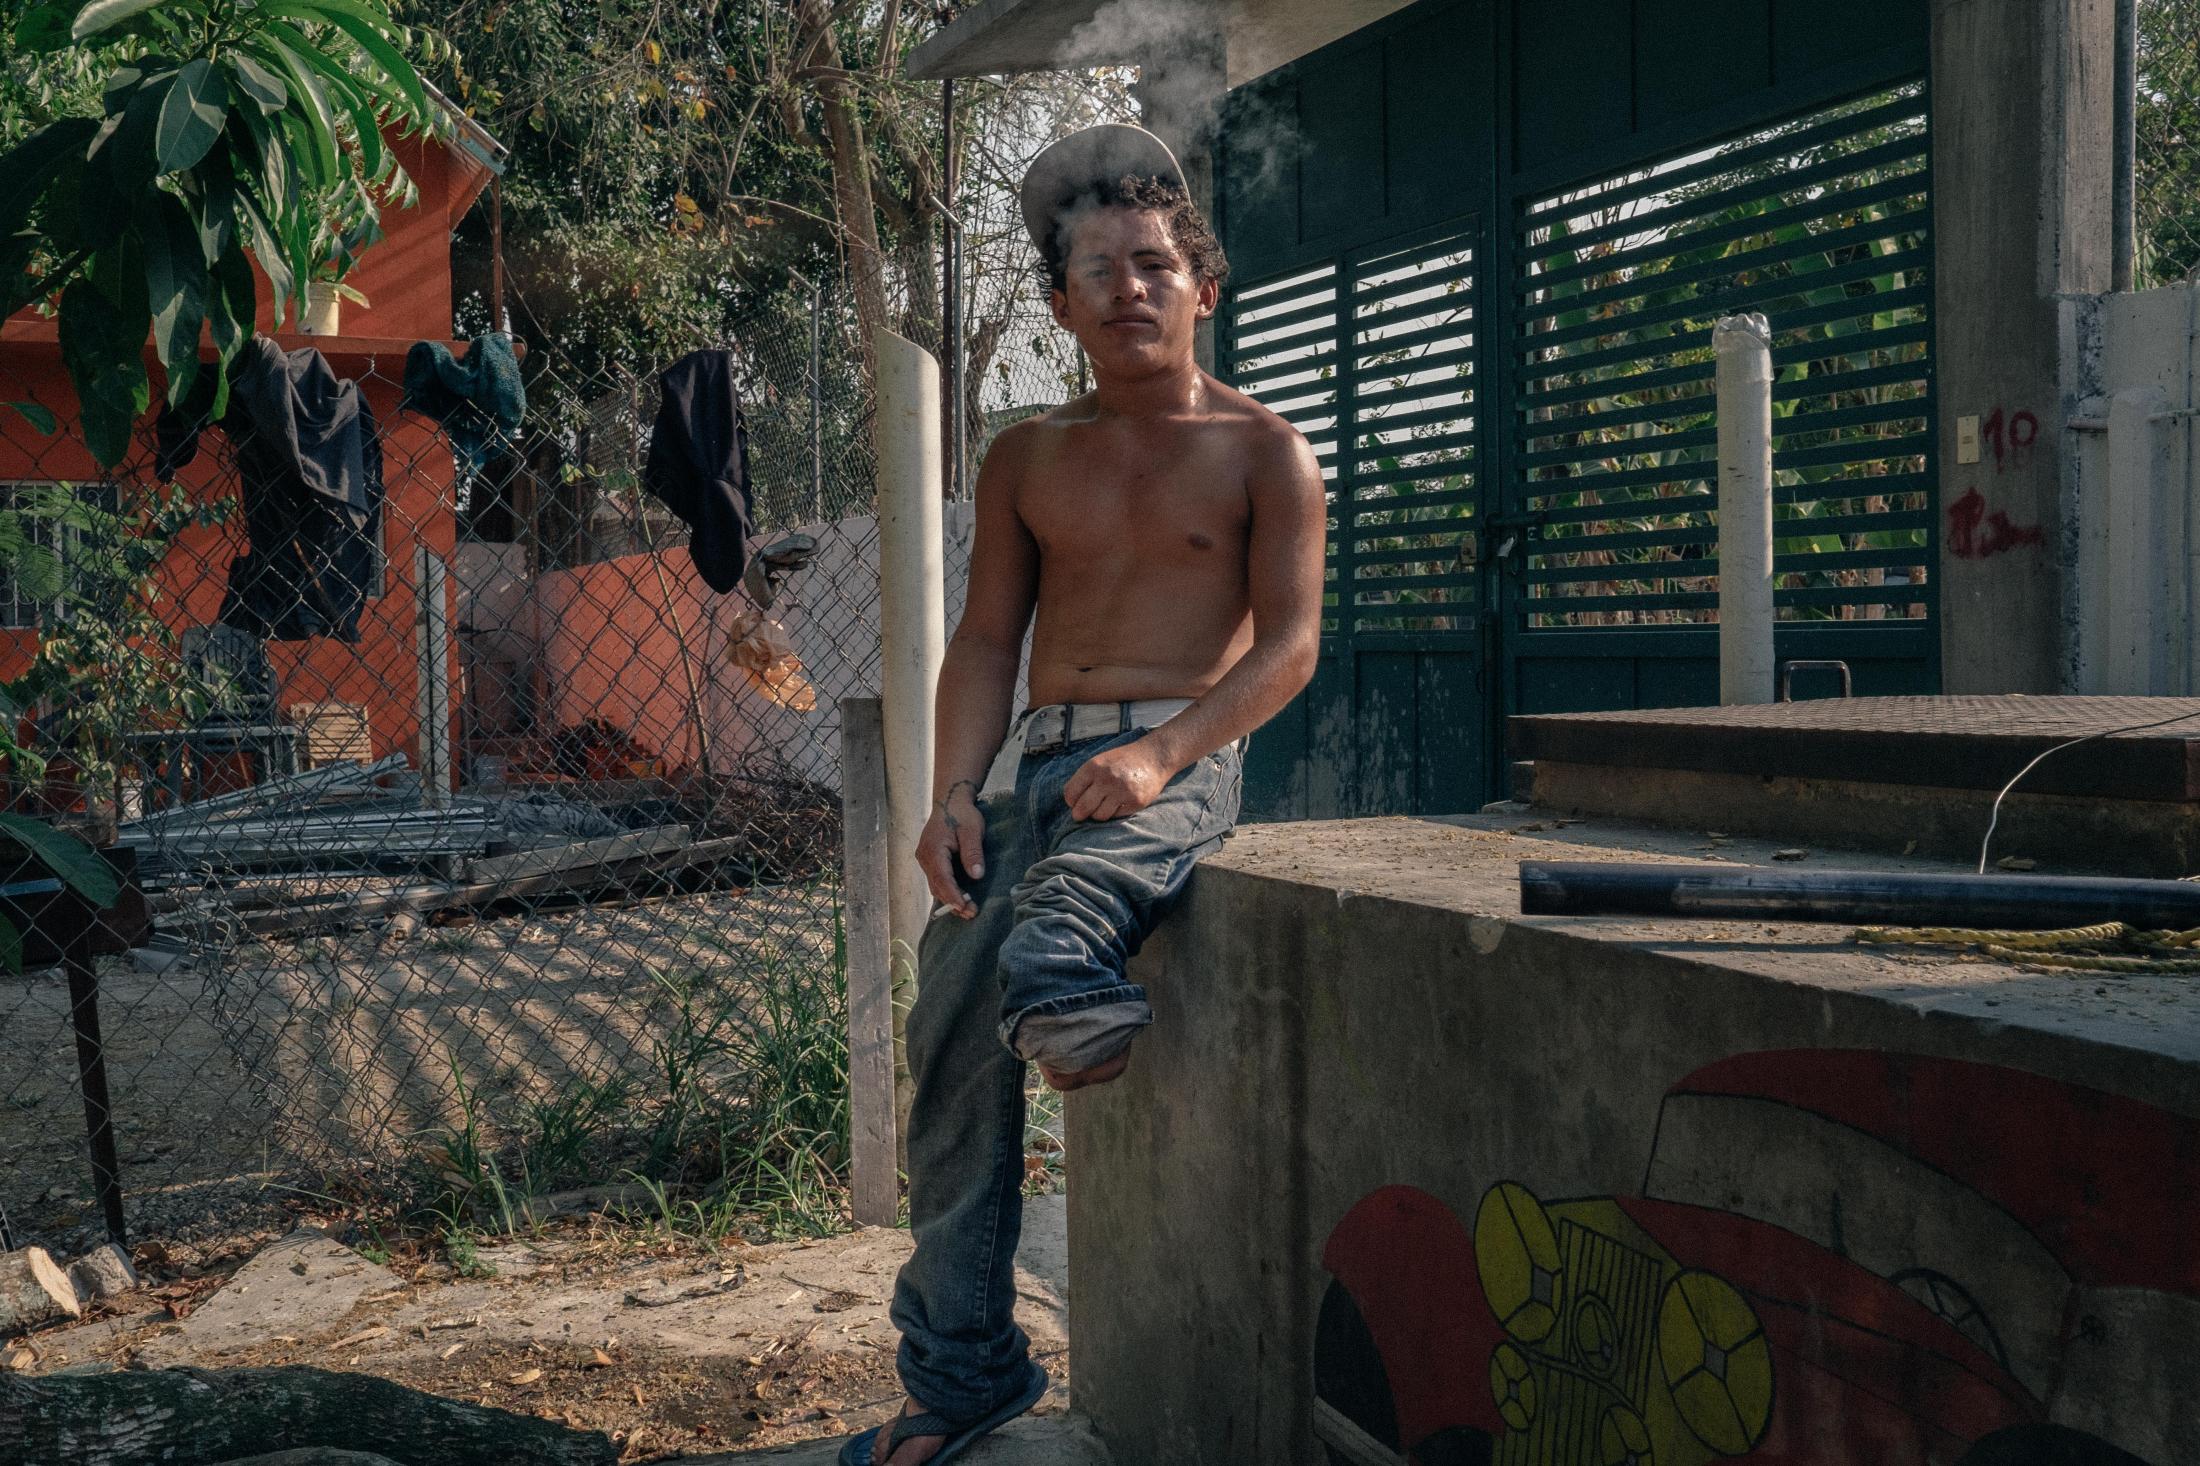 Southern Border - Carlos, 21, takes a break while chopping wood for the...